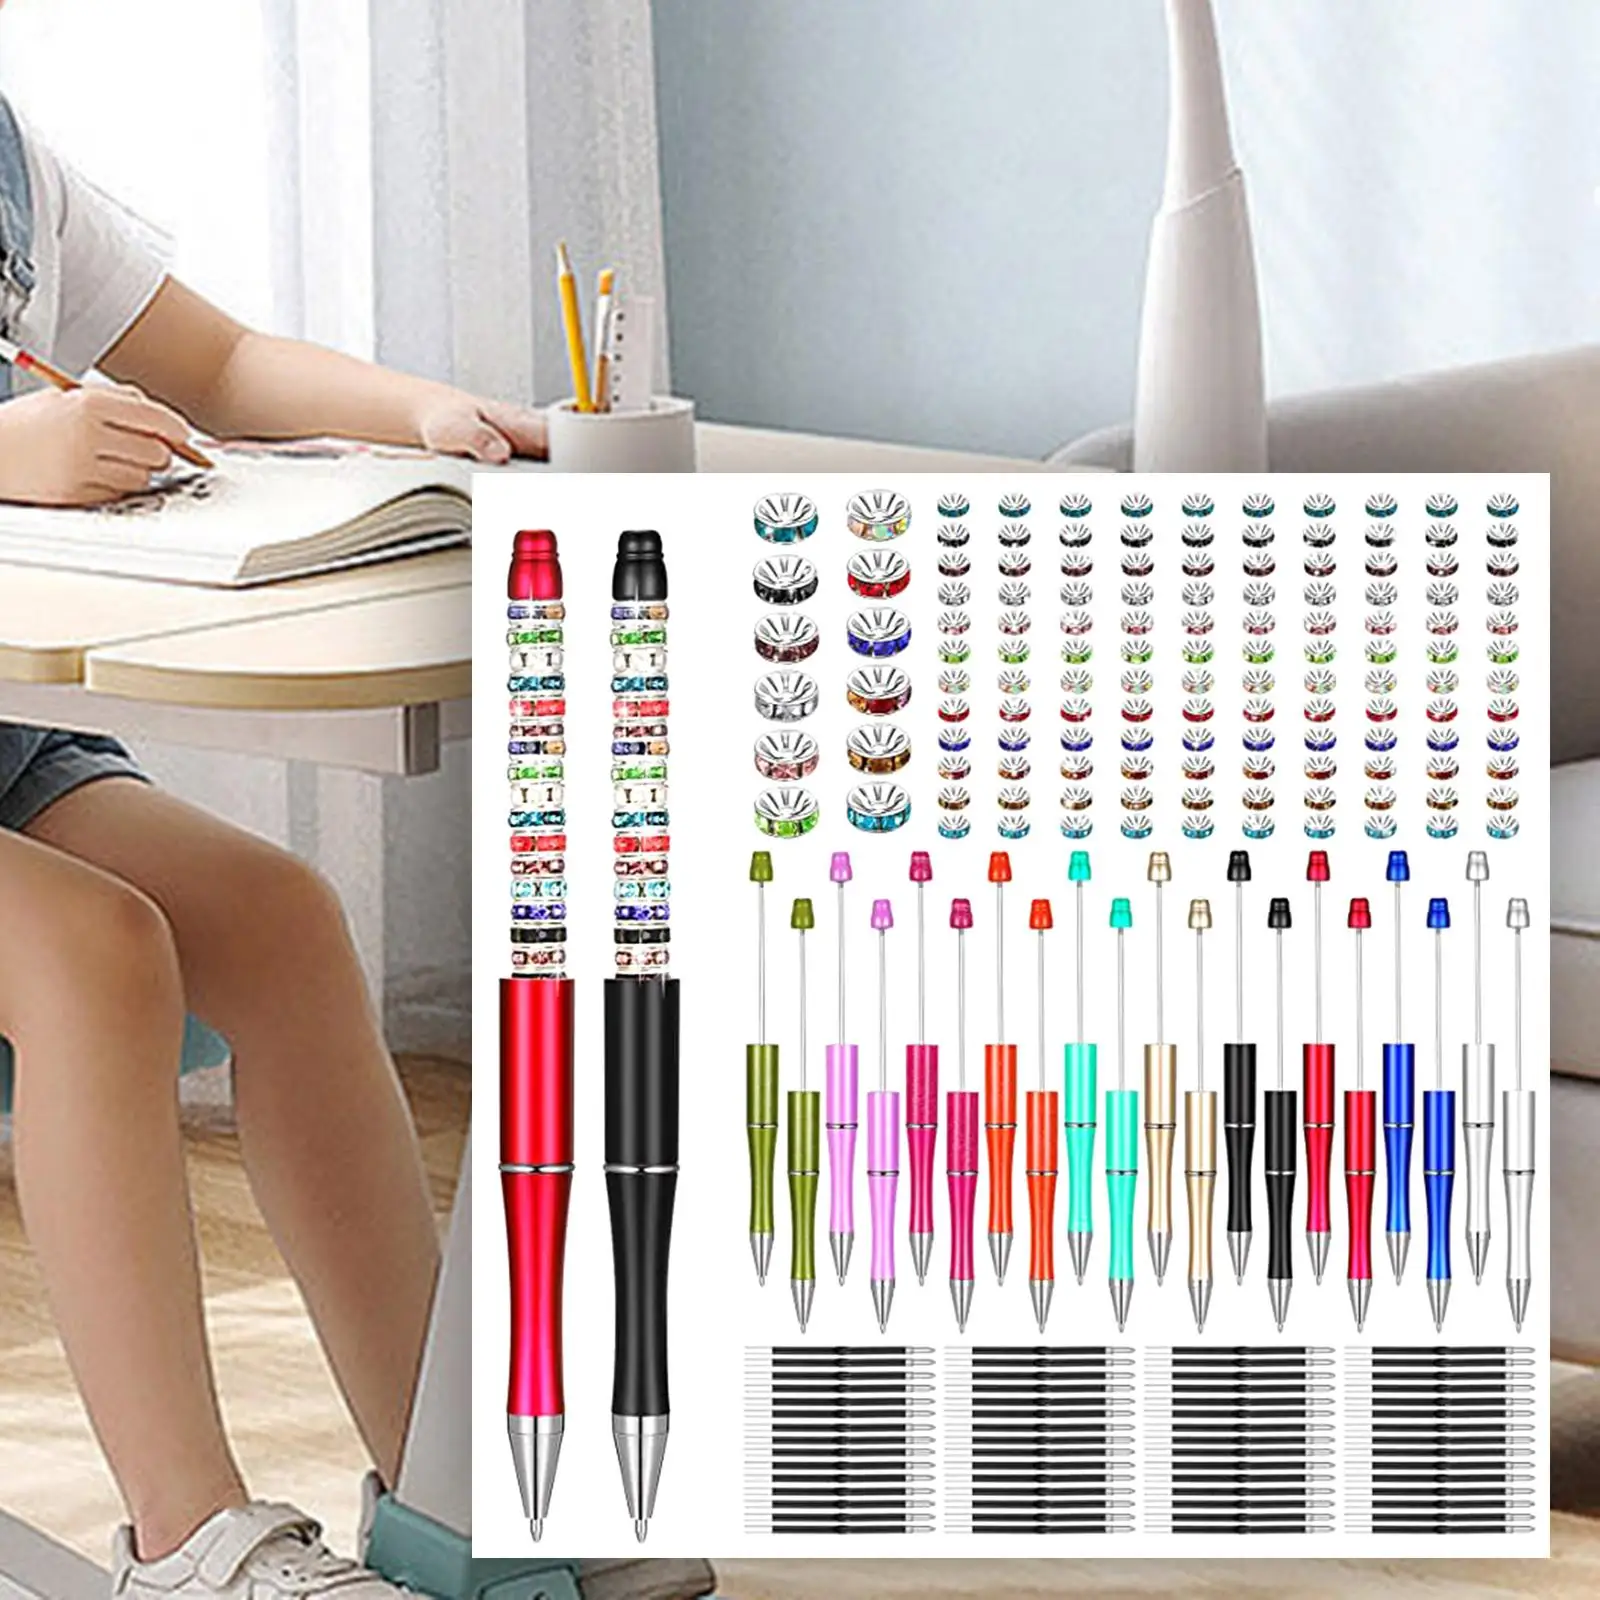 1.0mm Assorted Bead Pen Set Christmas Decor 300 Pack Beadable Pens for Draw Stationery Supplies Exam Spare Students Presents